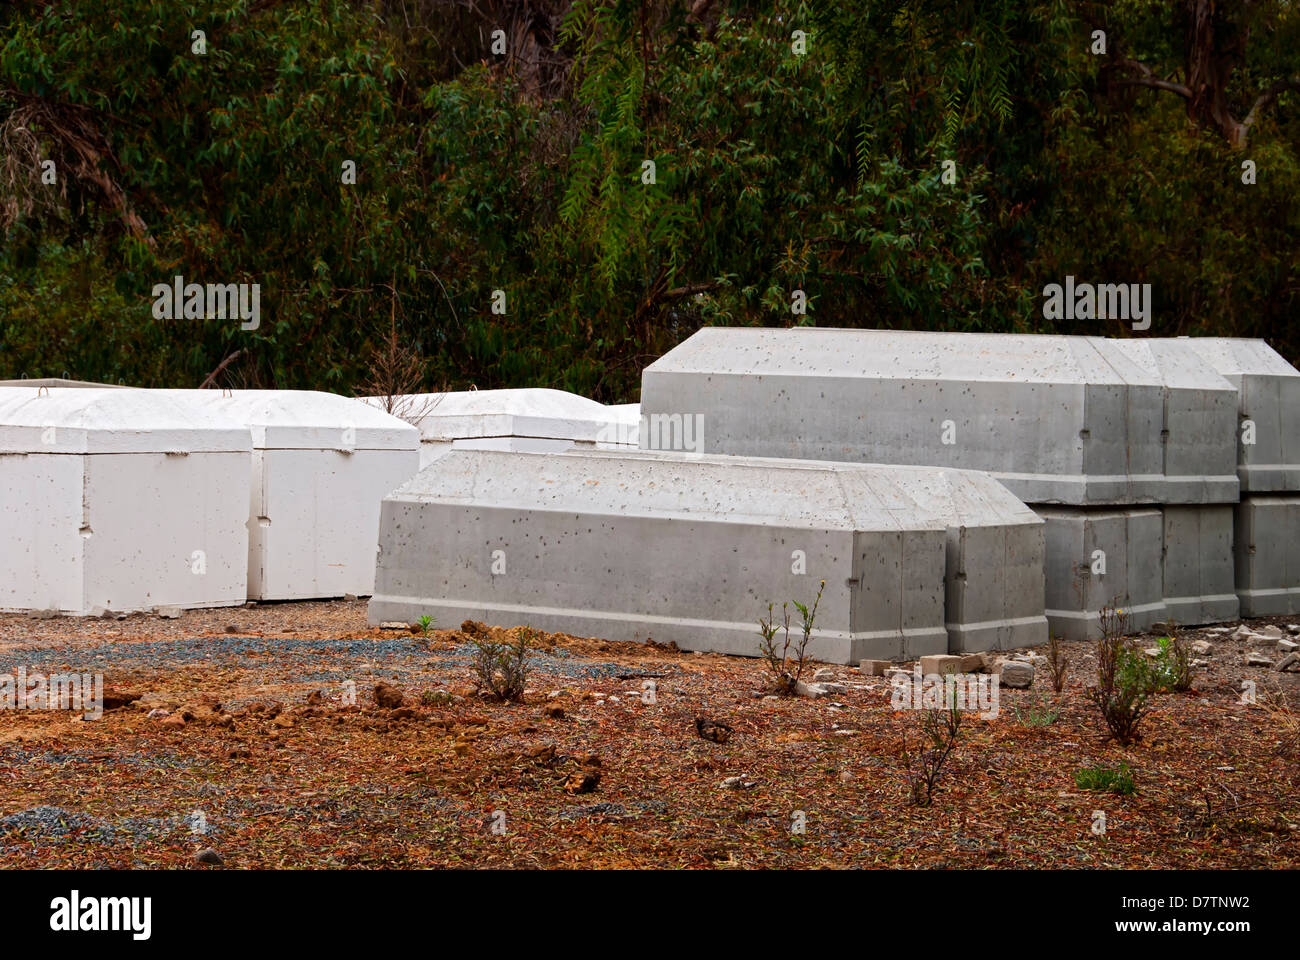 Group of concrete burial vaults Mount Hope Cemetery, San Diego, California, United States Stock Photo